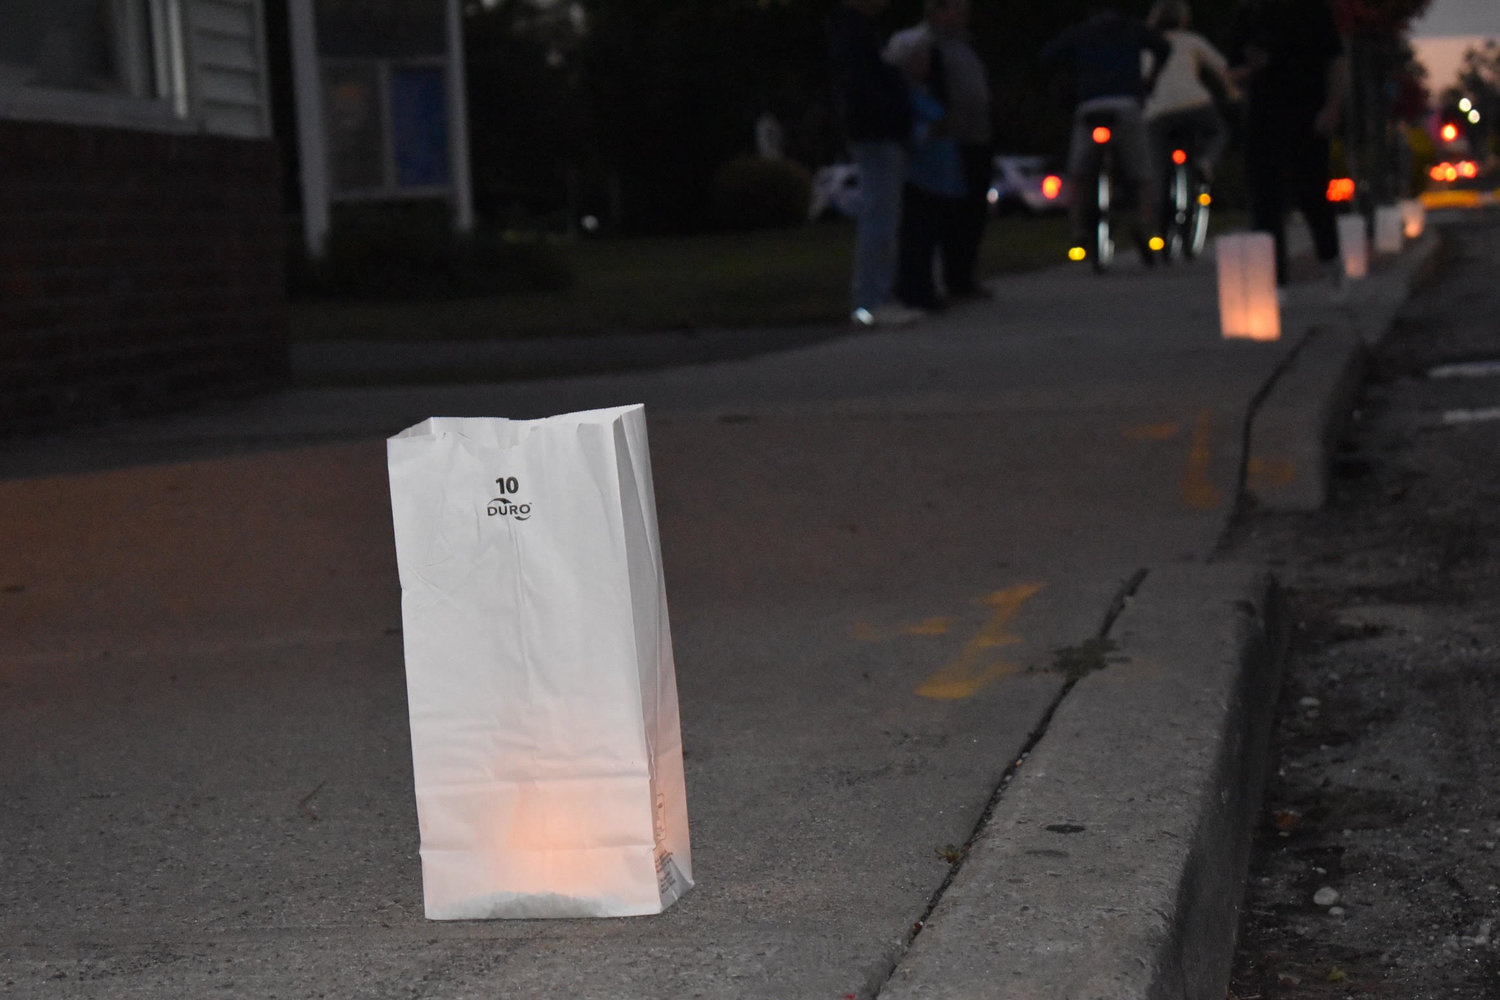 Luminaries on Blue Point Avenue. Just before dusk, volunteers set luminaries on sidewalks along the street. Mollie Dombrowsky, a 10-year-old who was working alongside her mother, Kristen, said during the vigil she would be thinking “about how Gabby is watching down on them from heaven.”